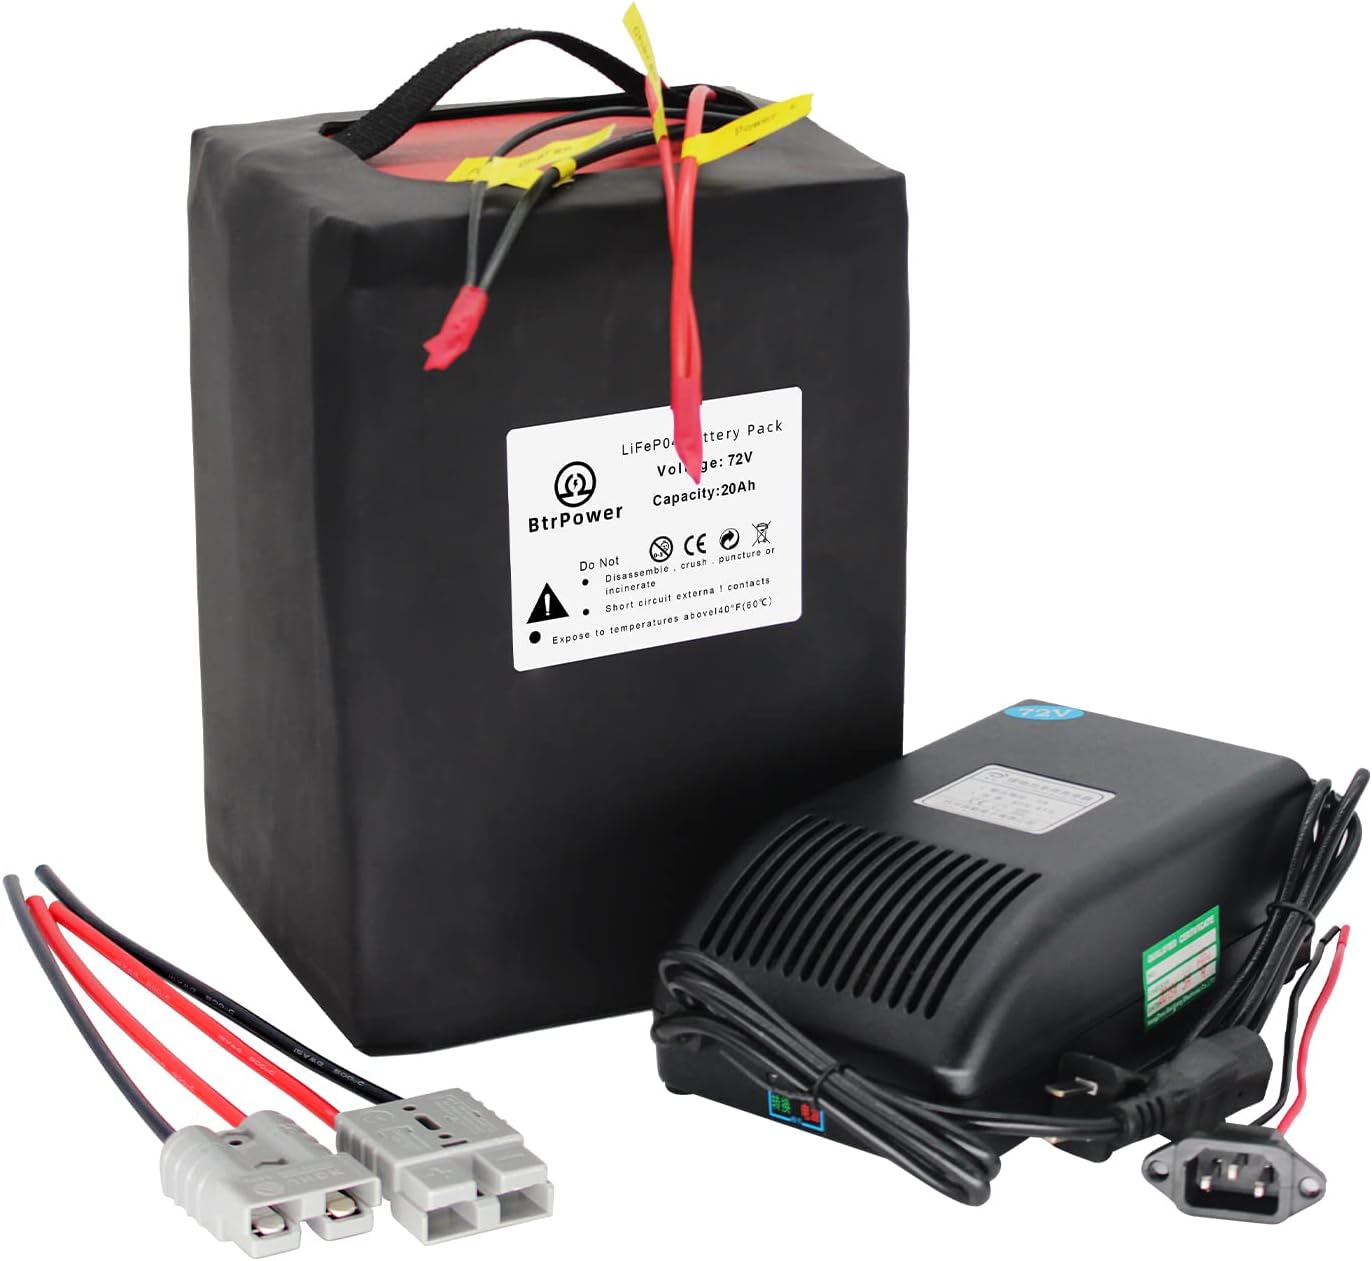 BtrPower Ebike Battery 72V 20AH LiFePO4 Battery Pack with 5A Charger 80A BMS